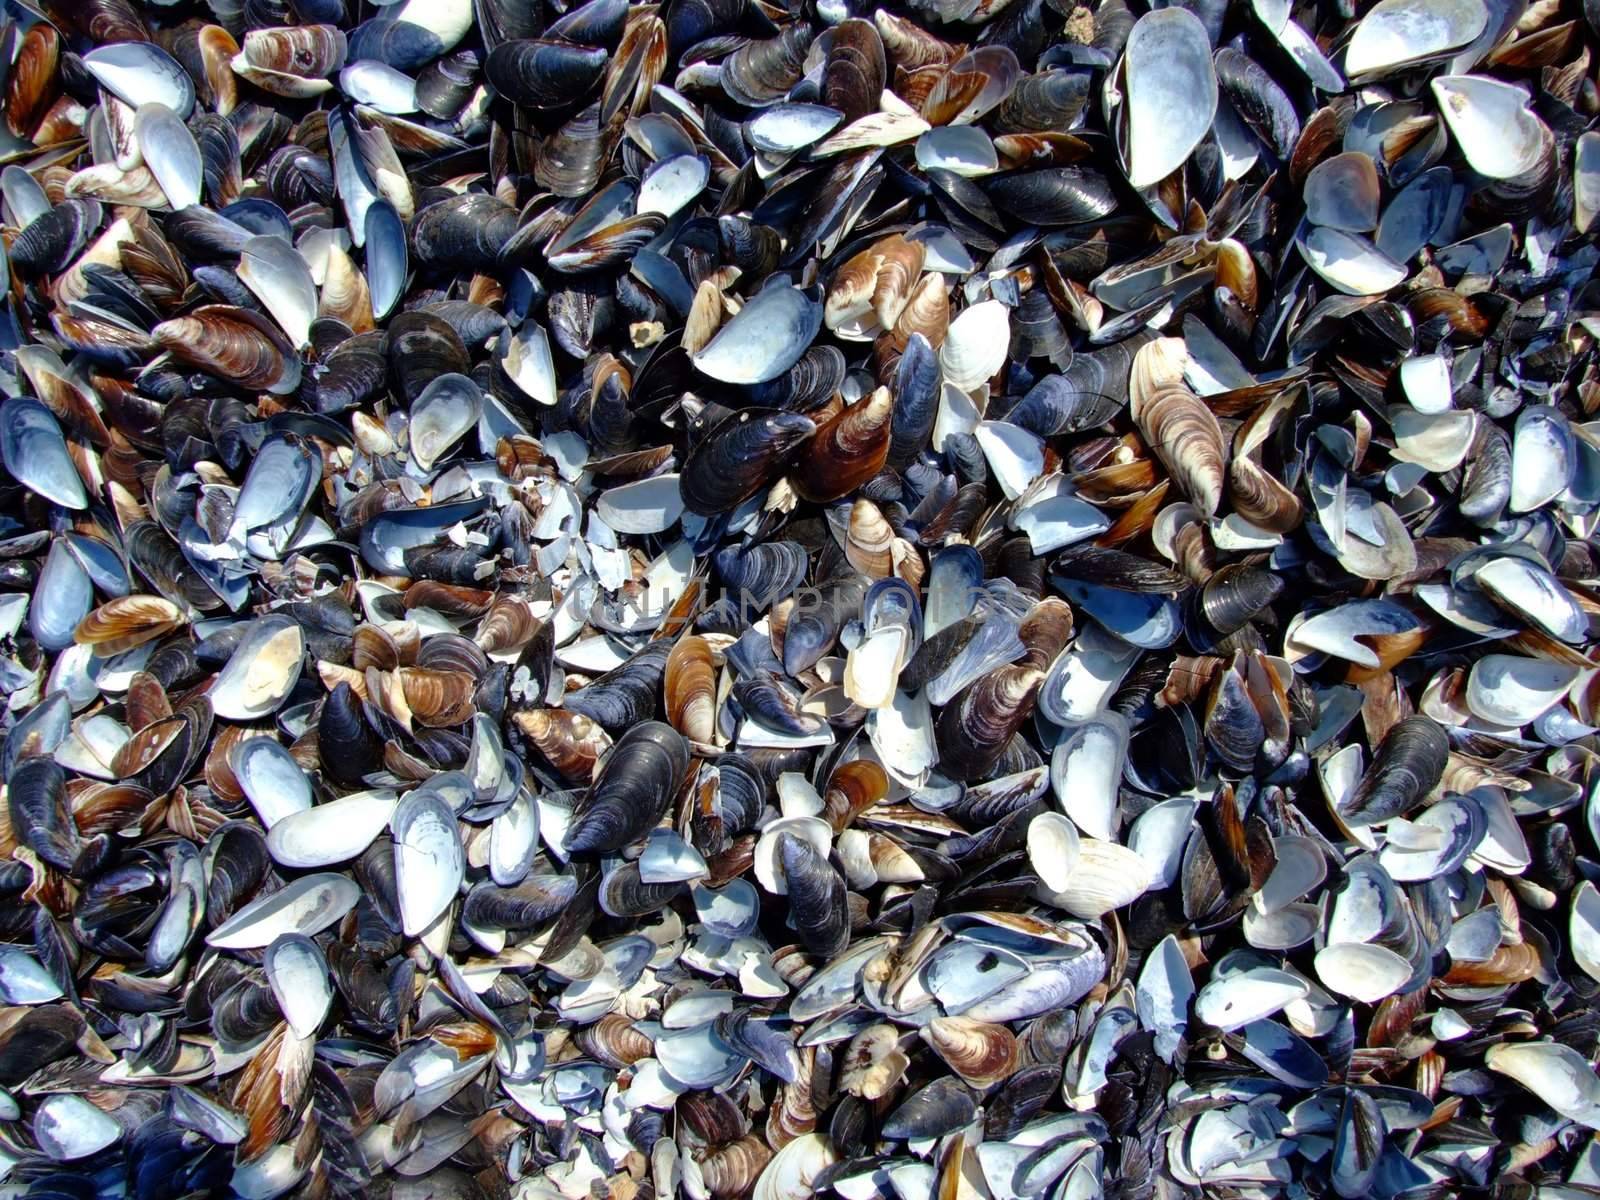 cockleshells on the beach of the Black Sea by acidgrey